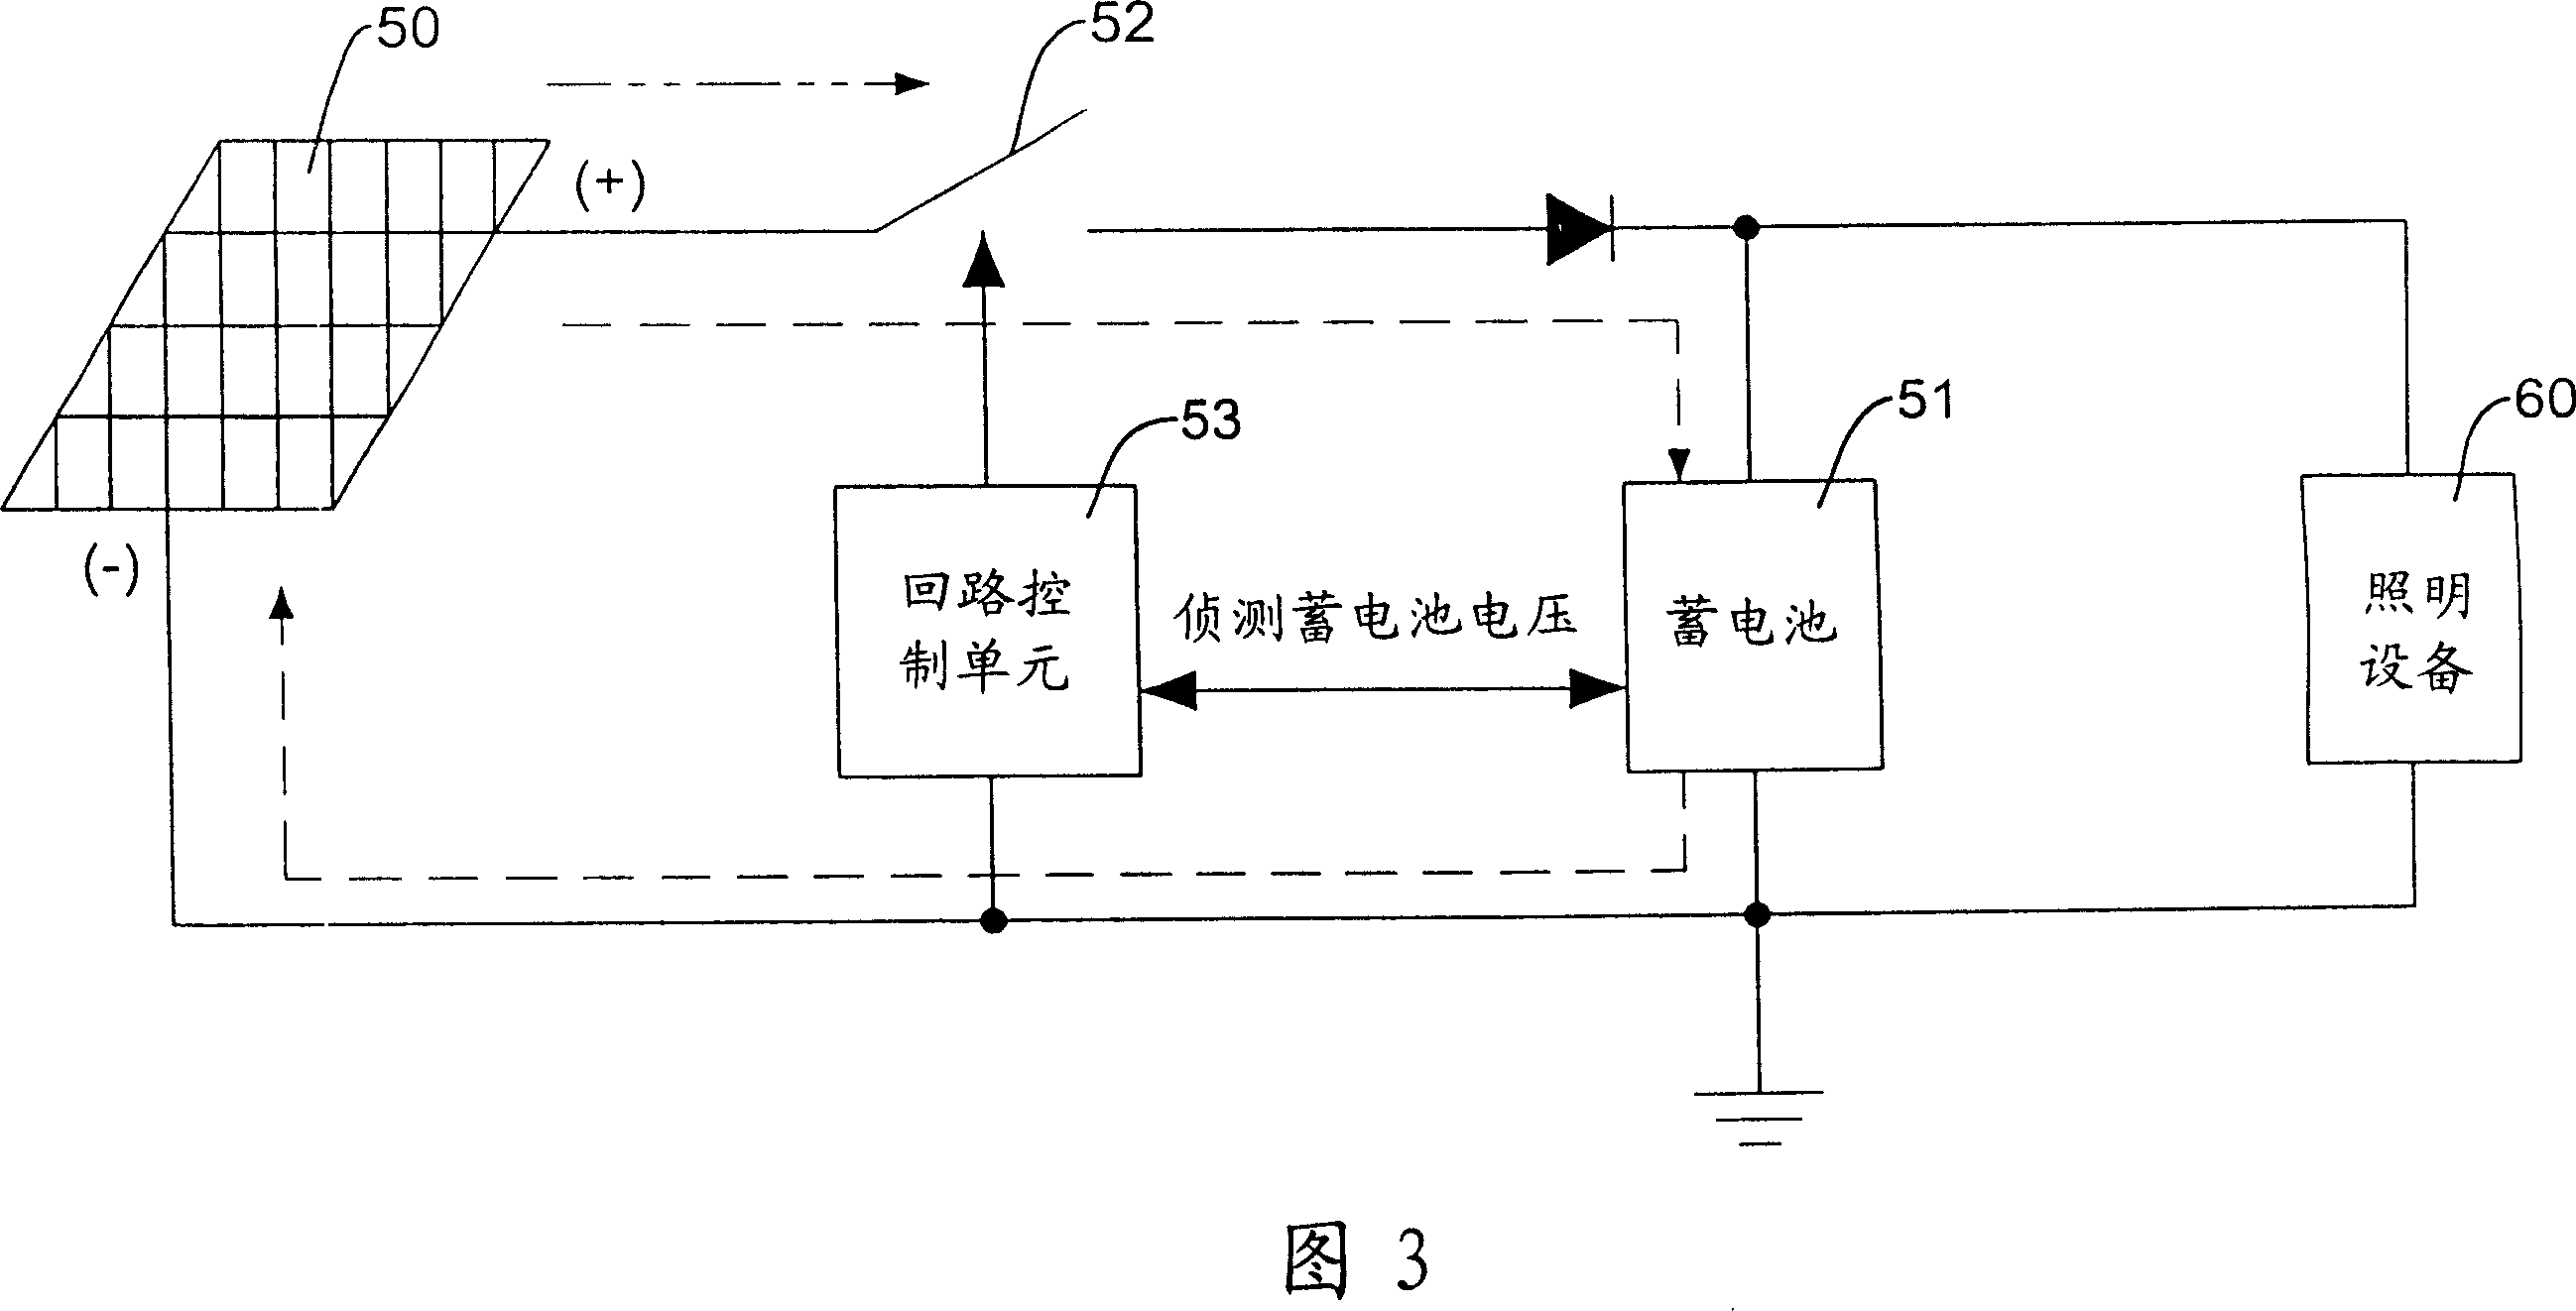 Charge-discharge controller for solar lighting equipment